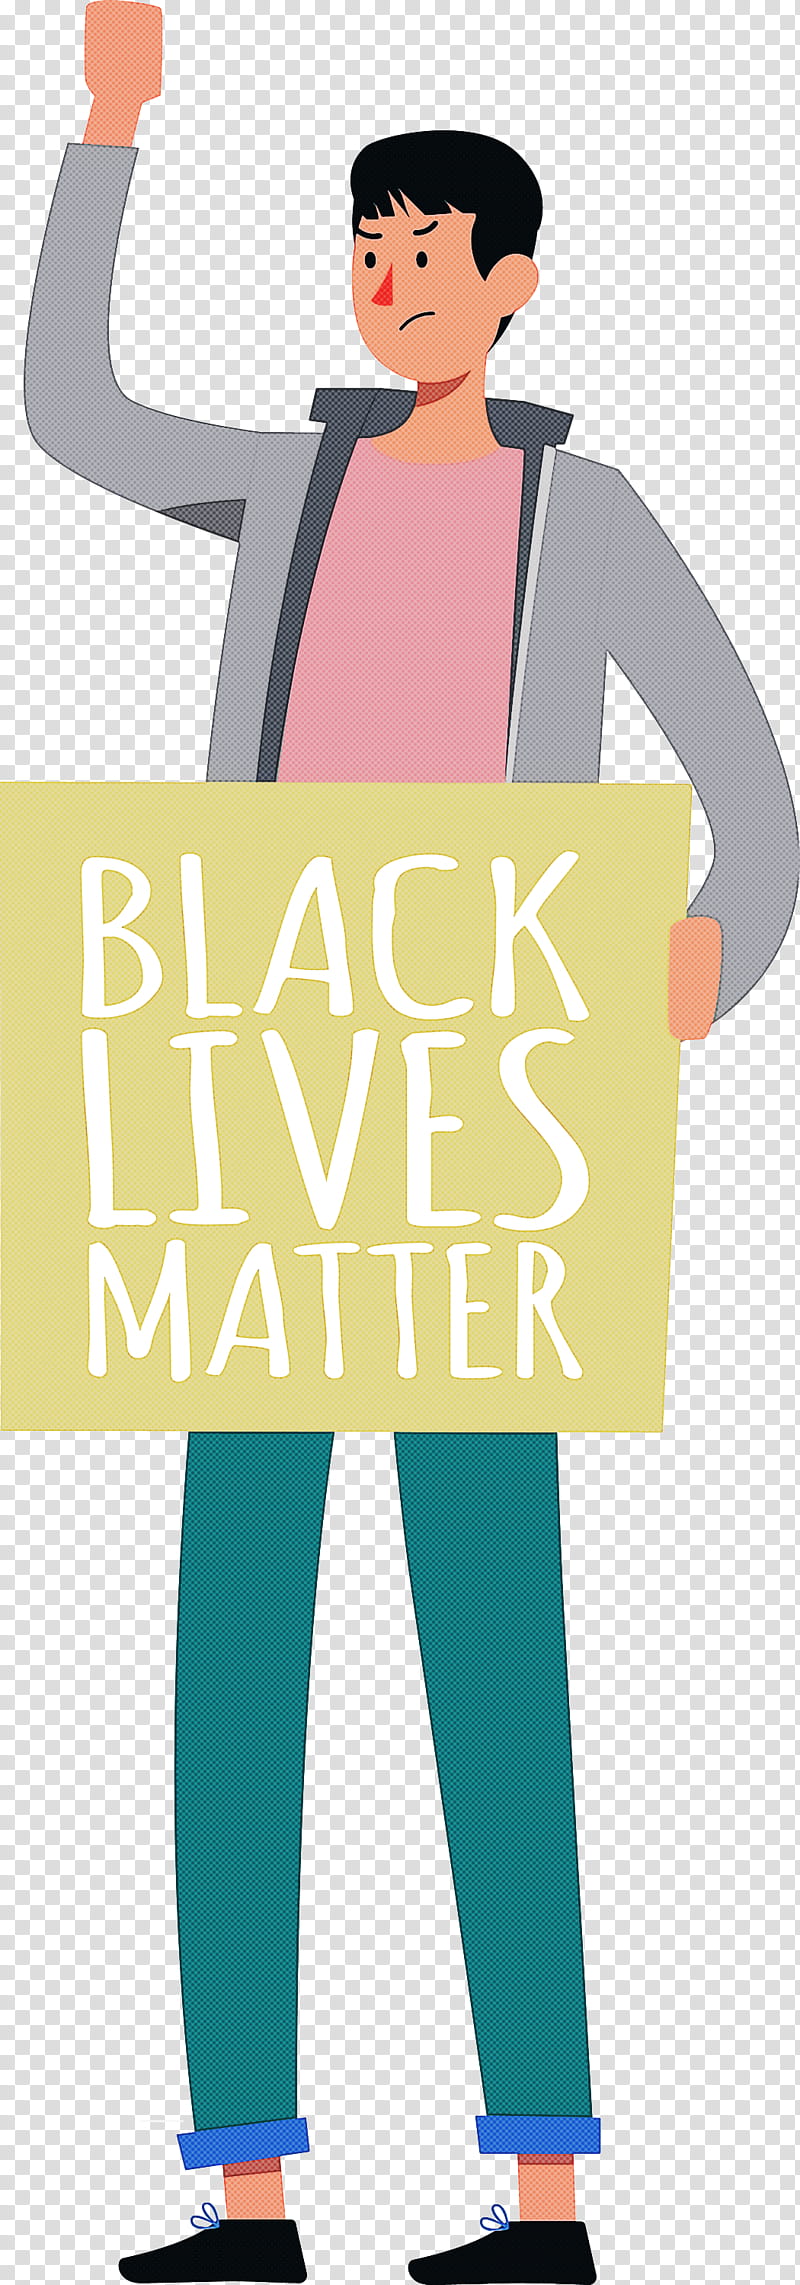 Black Lives Matter STOP RACISM, Poster, Logo, Watercolor Painting, Silhouette, Cartoon, Poster Paint, Text transparent background PNG clipart